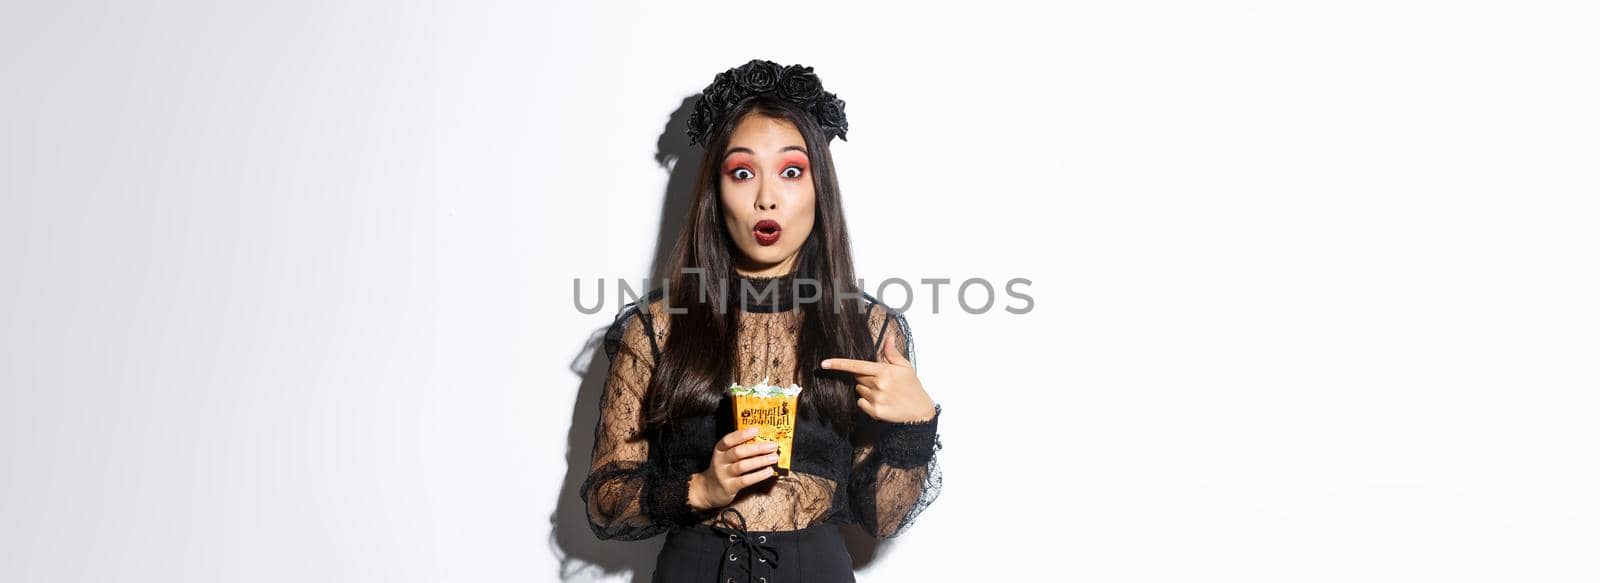 Amazed asian girl looking at camera while pointing finger at sweets, gather treats on halloween, wearing witch dress, standing over white background.